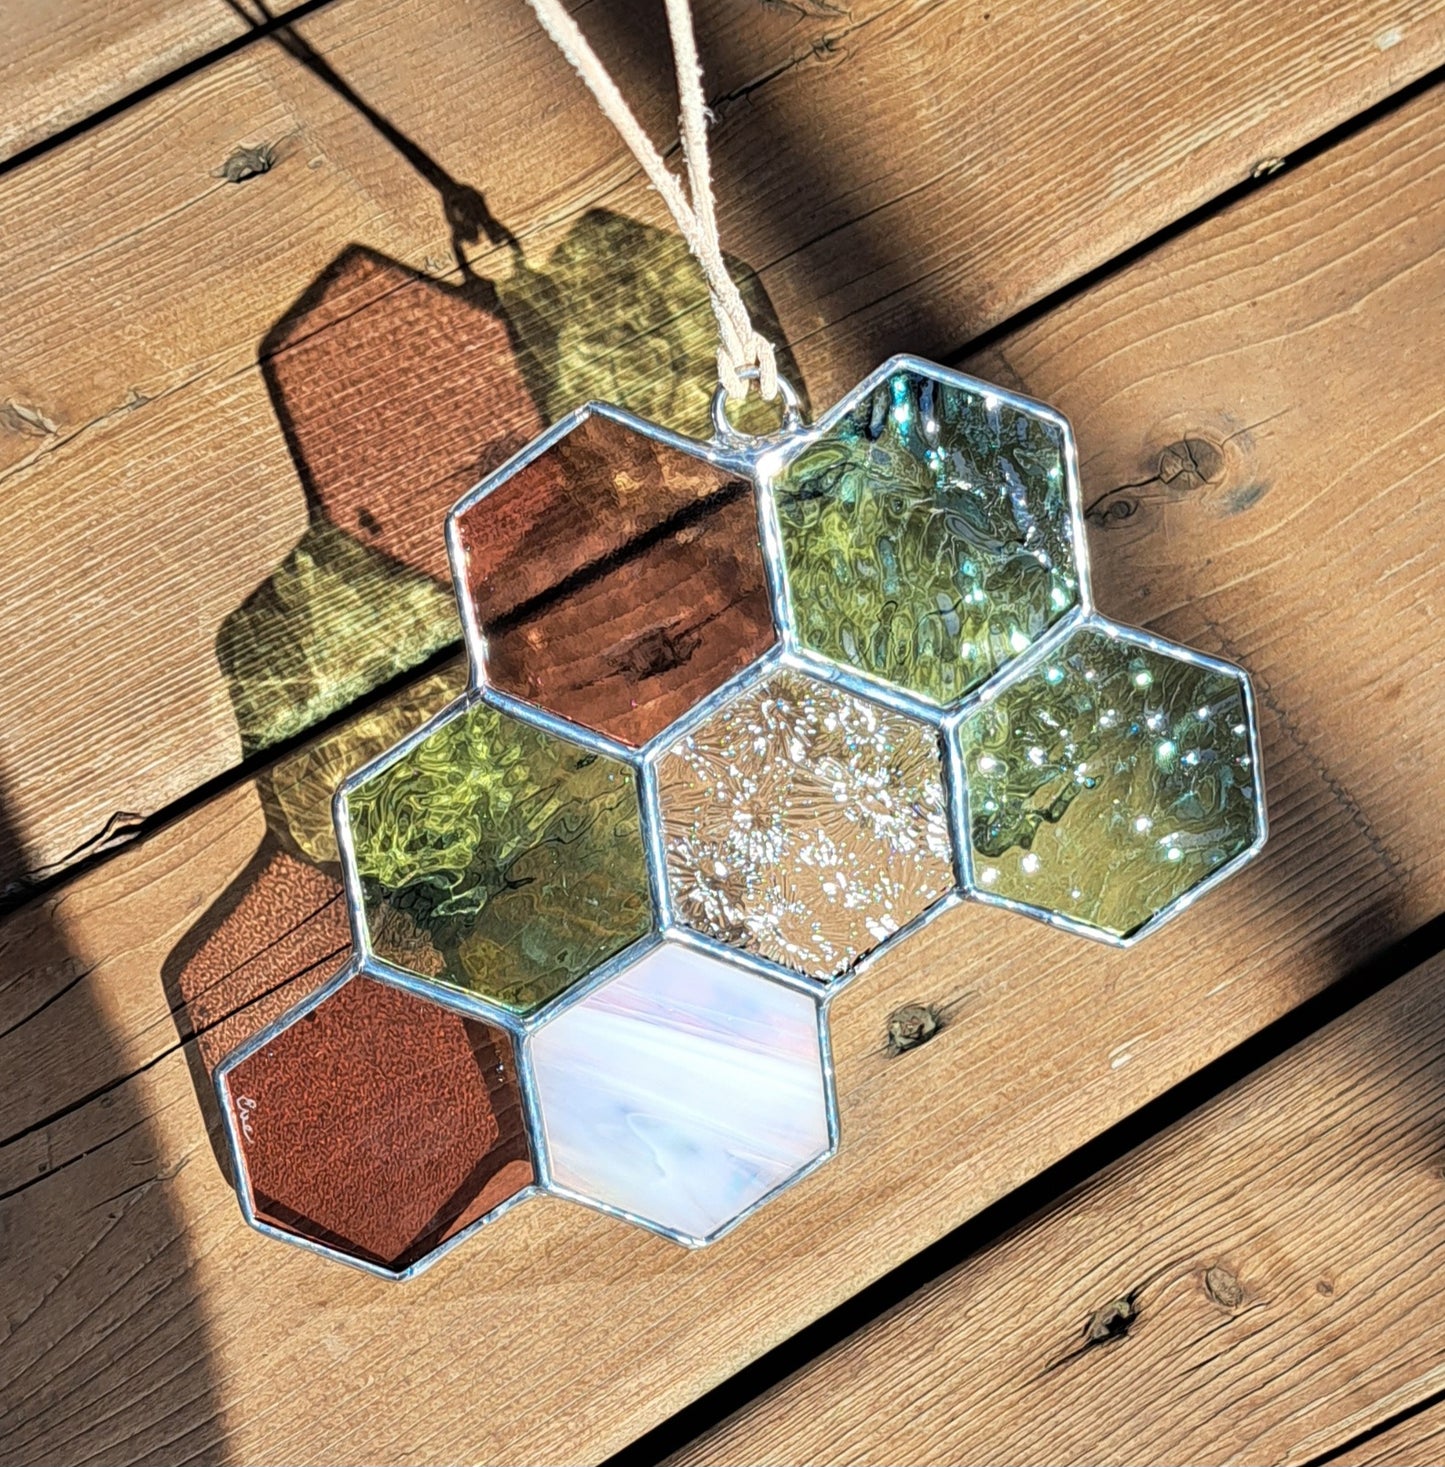 Stained Glass Honeycomb Sun Catchers